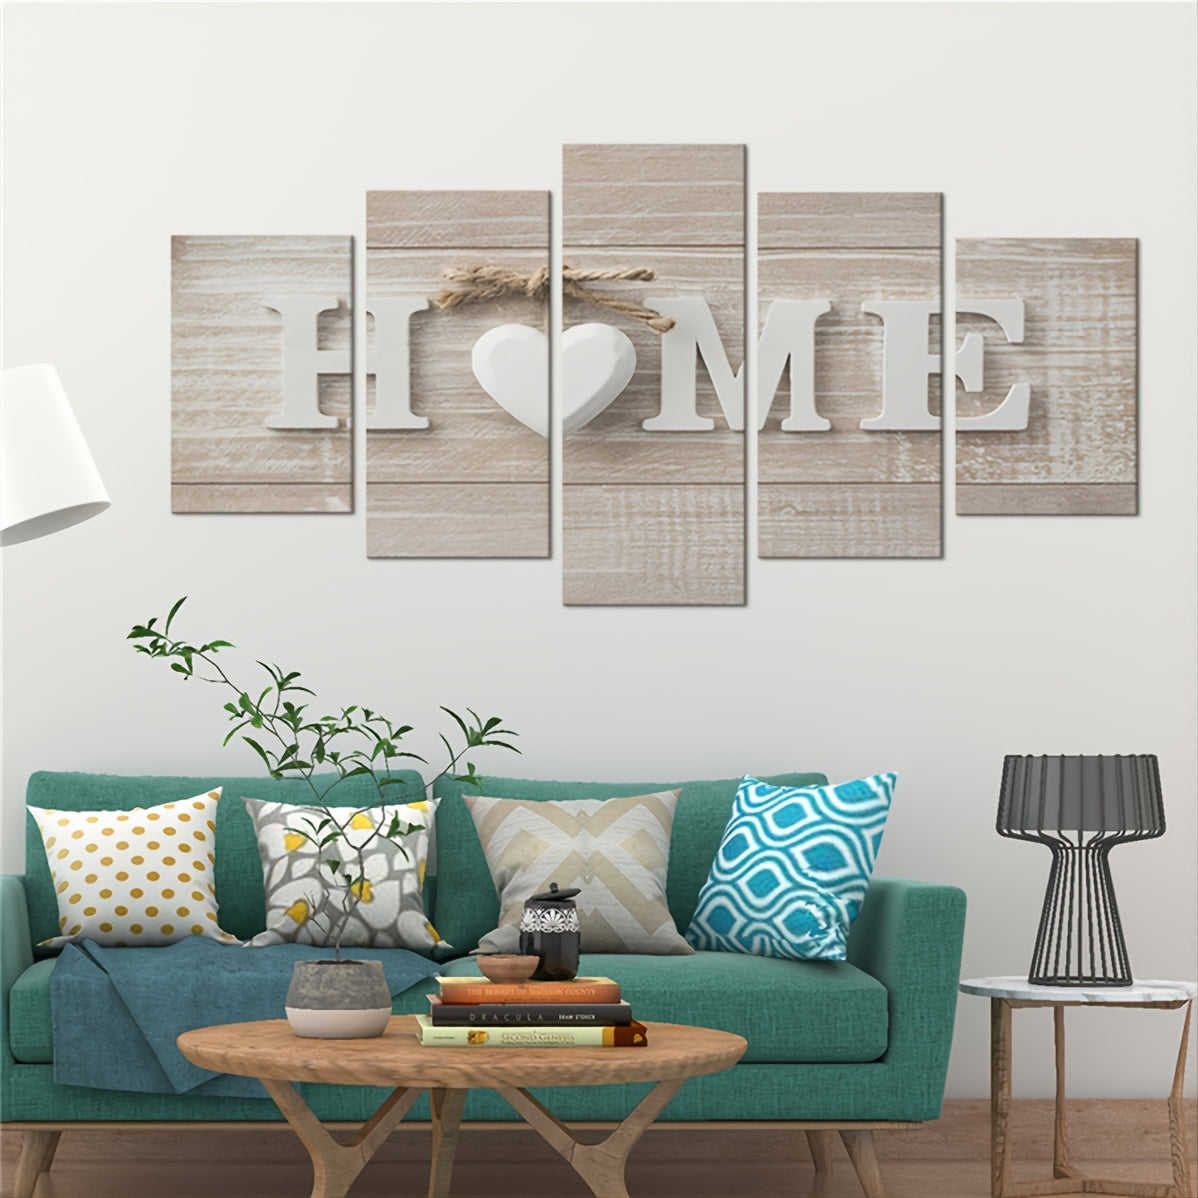 Set of 5 3D Effect Art Decorative Paintings - "HOME" Word Design (No Frame Included)